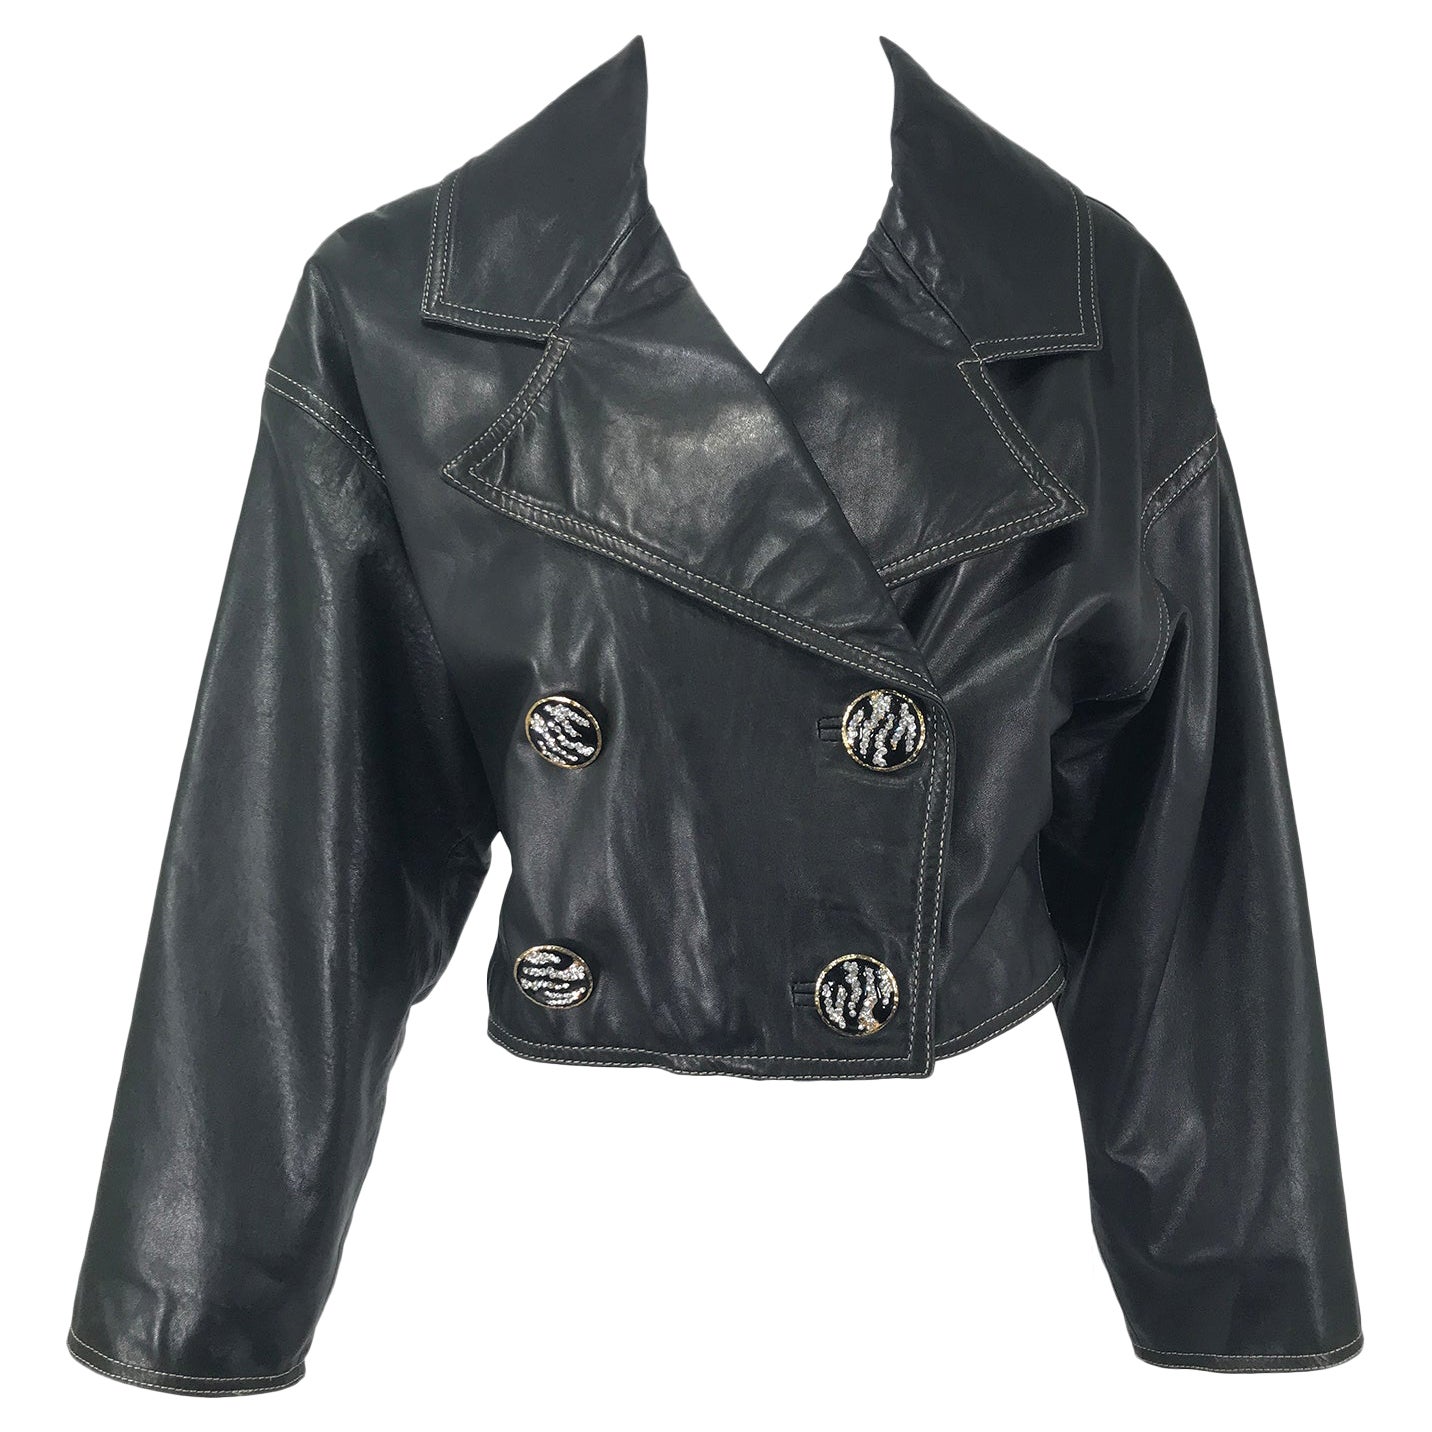 Genny Black Leather Bomber Jacket With Rhinestone Buttons & Gold Stitching 1980s For Sale